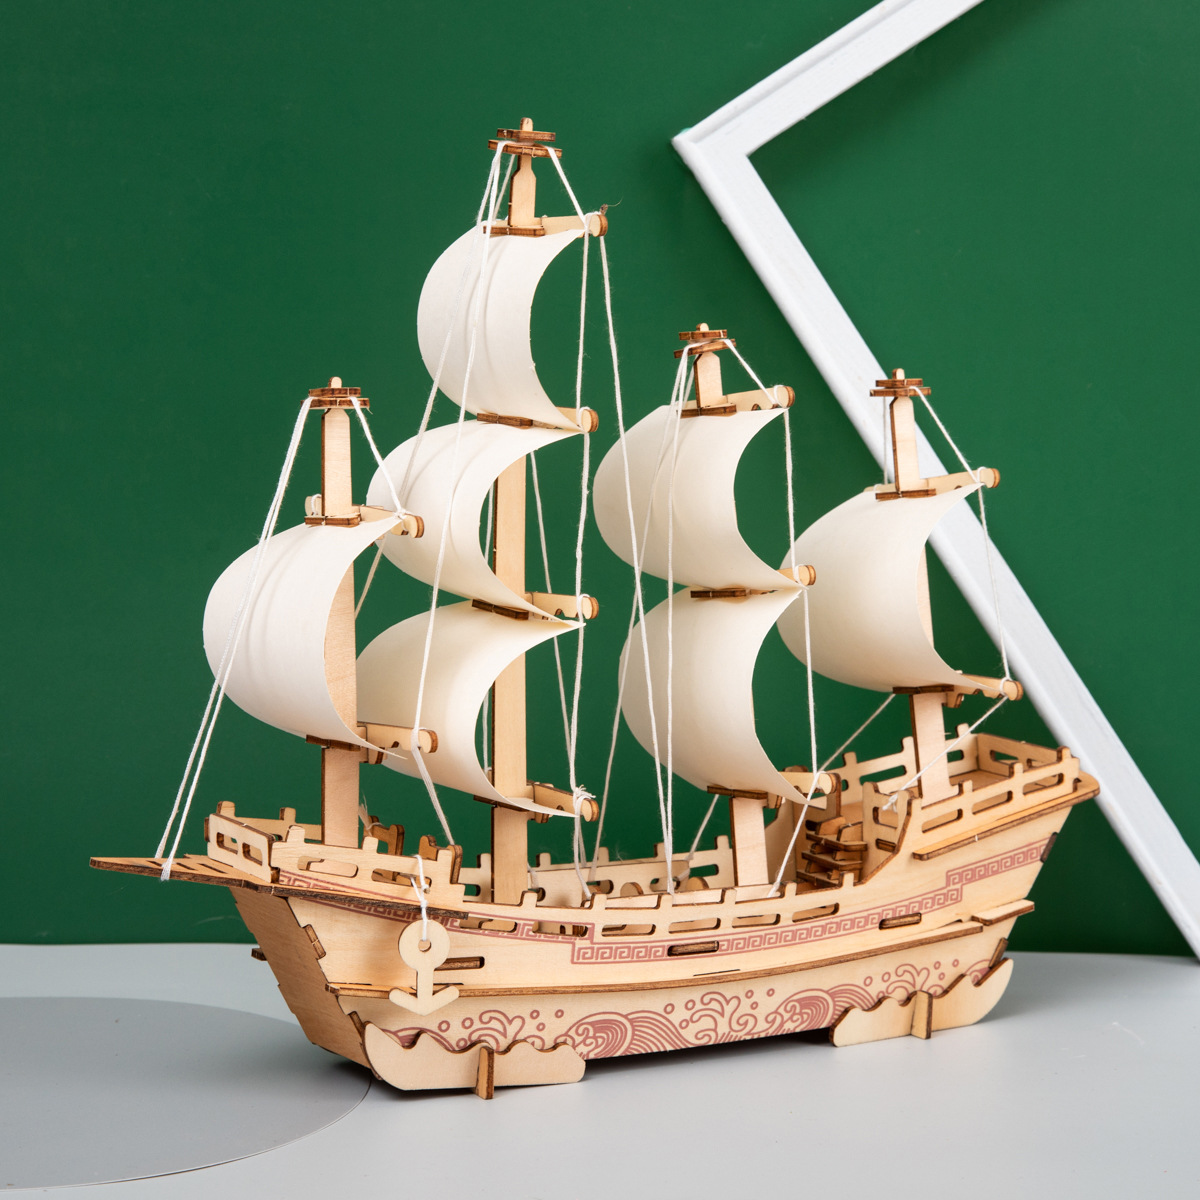 Hot Sale Cross-Border Stall 3d 3d Puzzle Model Handmade Wooden Assembled Ship Model Educational Diy Creative Toy Gift